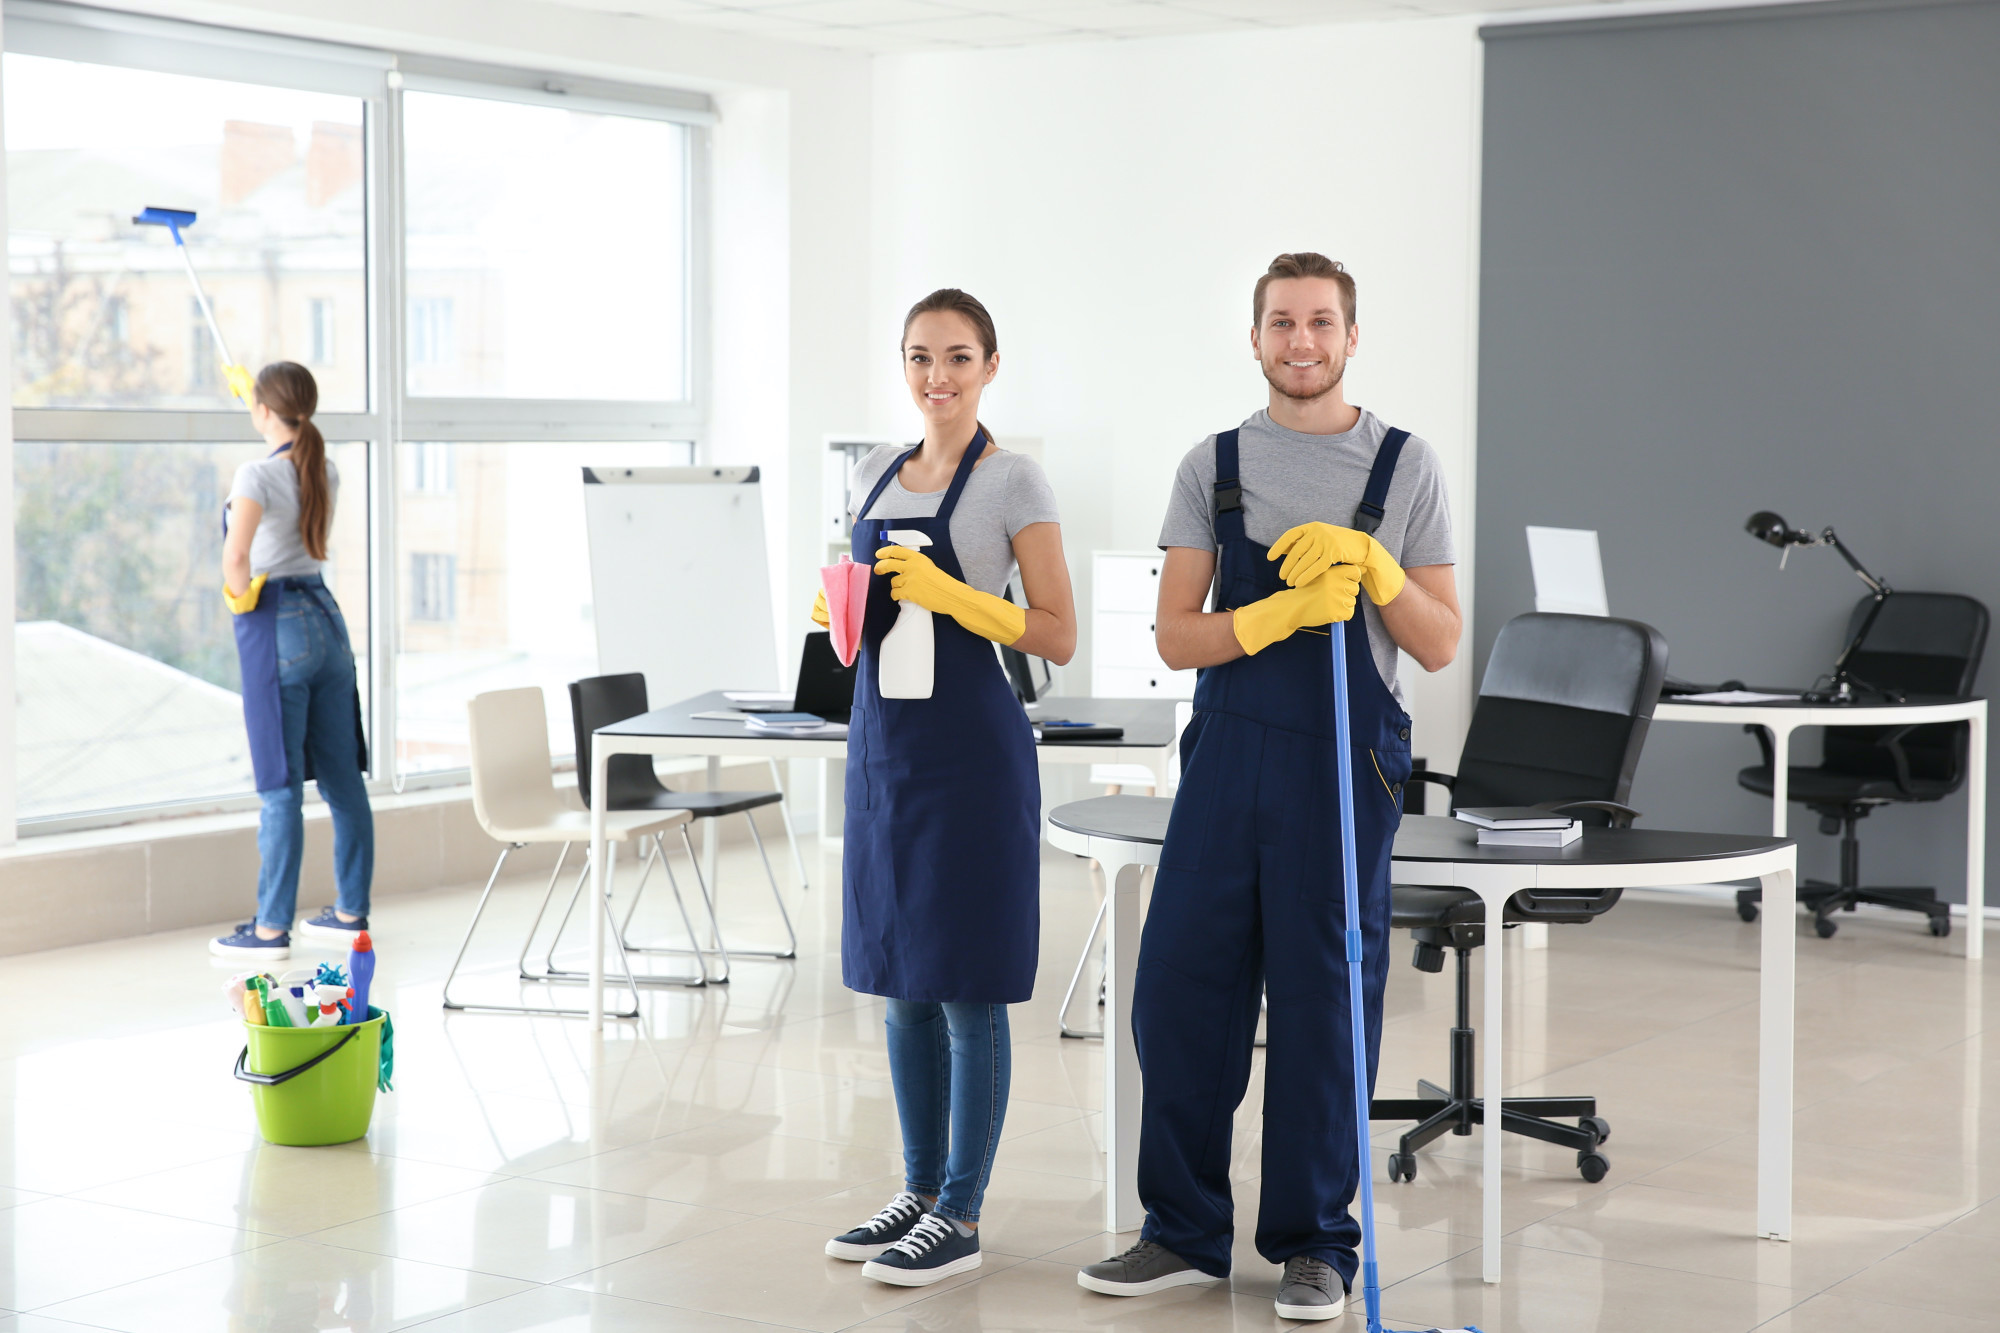 Cleaning company near me: Do you want to know how to choose the right company? Read on to learn how to make the right choice.